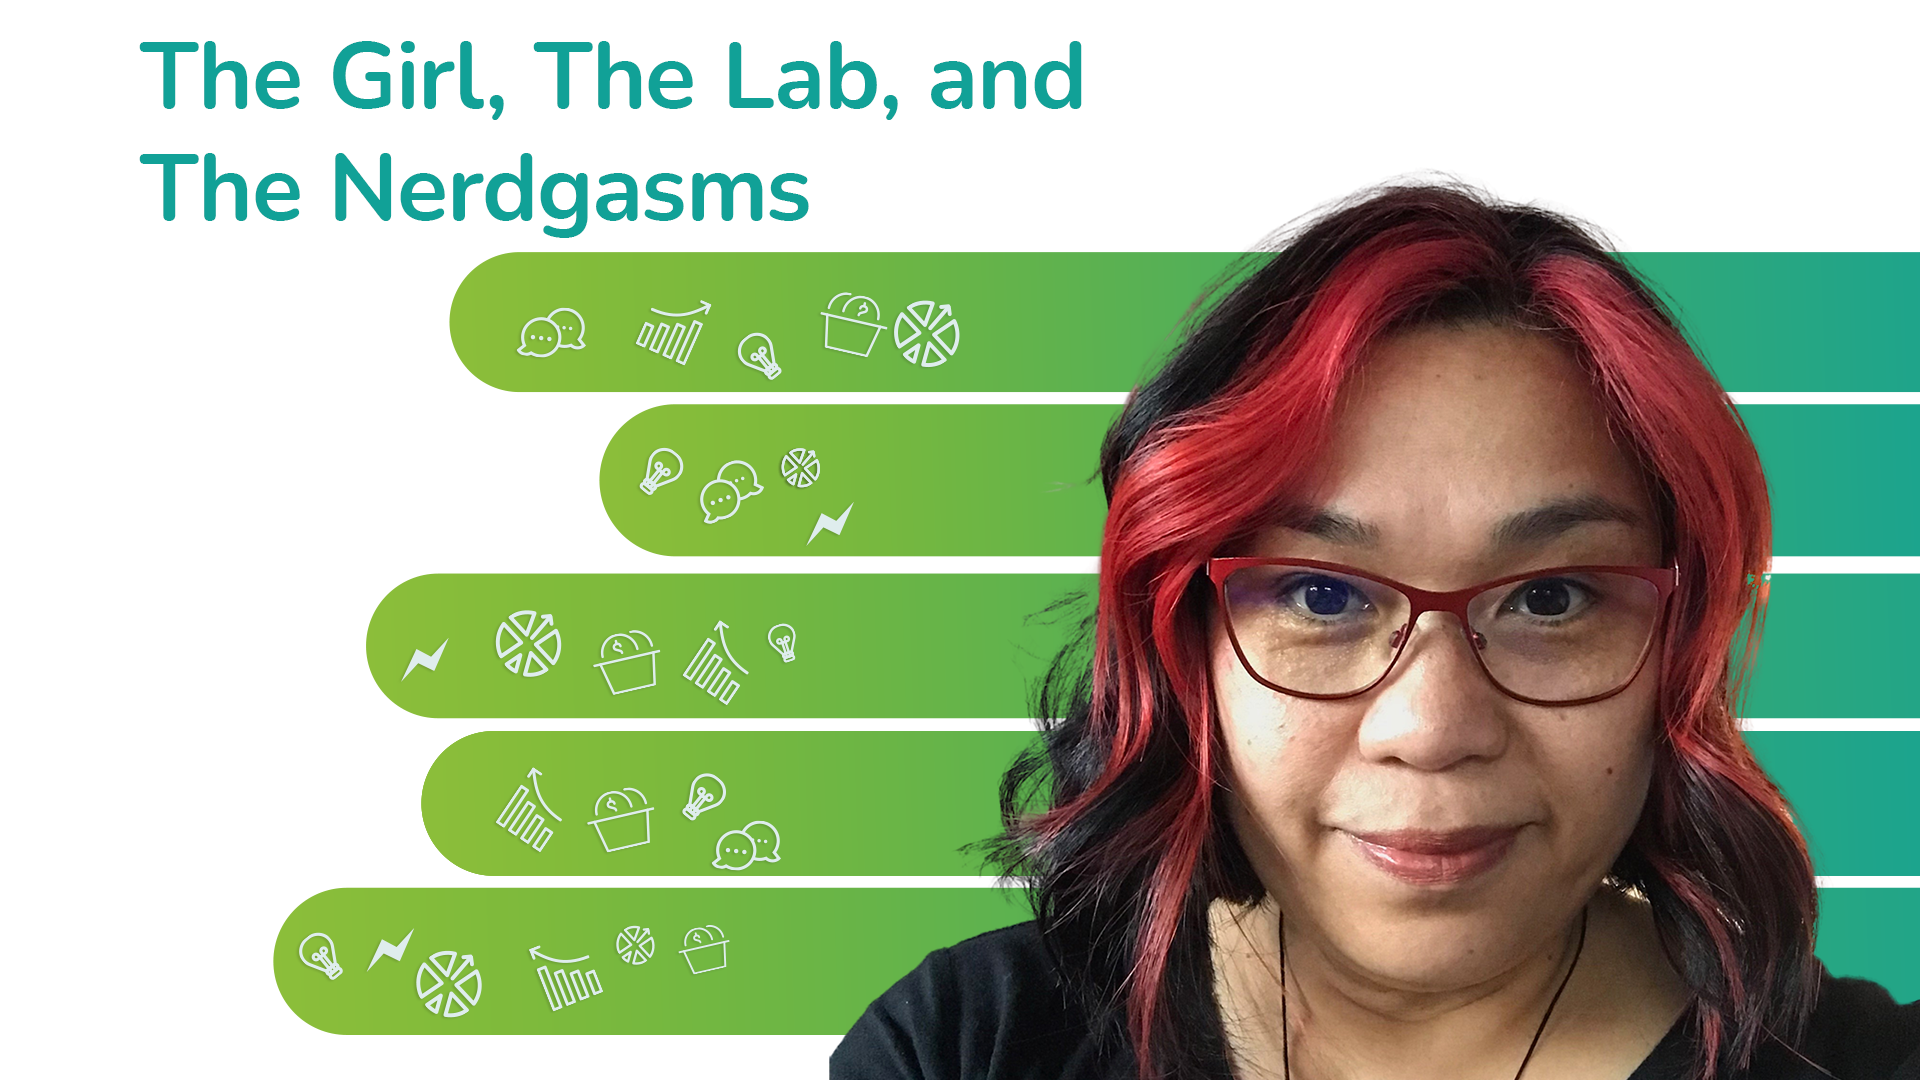 The Girl, The Lab and Nerdgasms